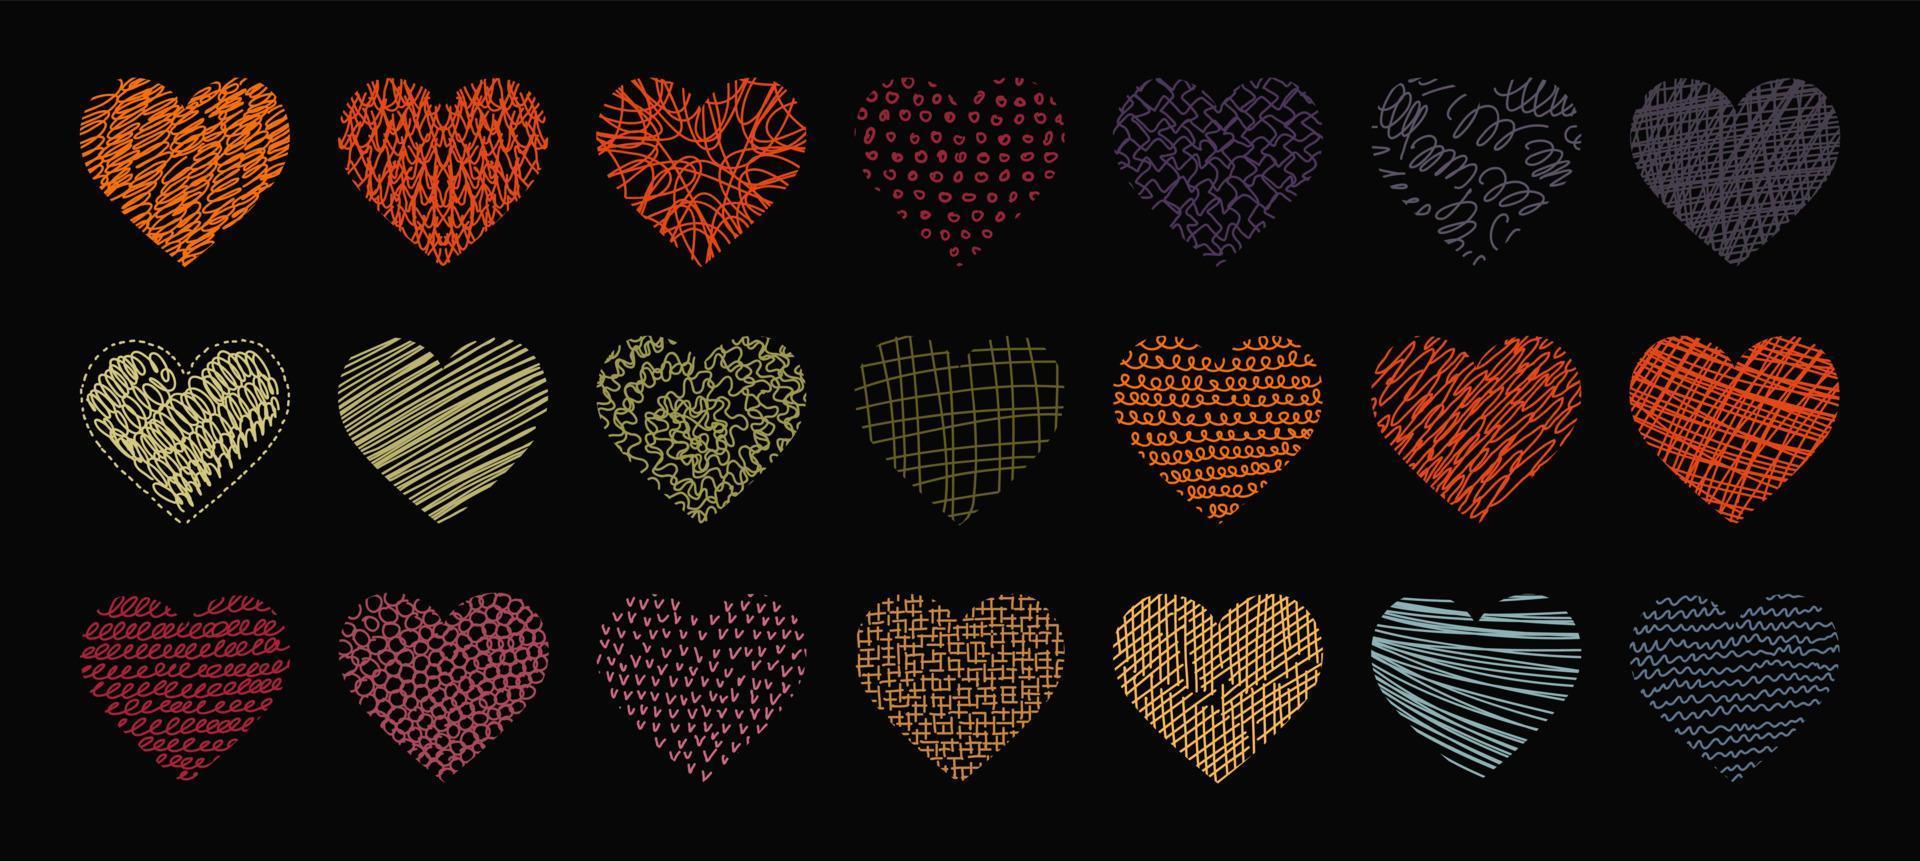 Vector set of abstract heart shaped backgrounds. Modern trendy Valentines day illustration. Patterns of hand drawn curves, lines. Doodle icons set for social networks, posters, design templates